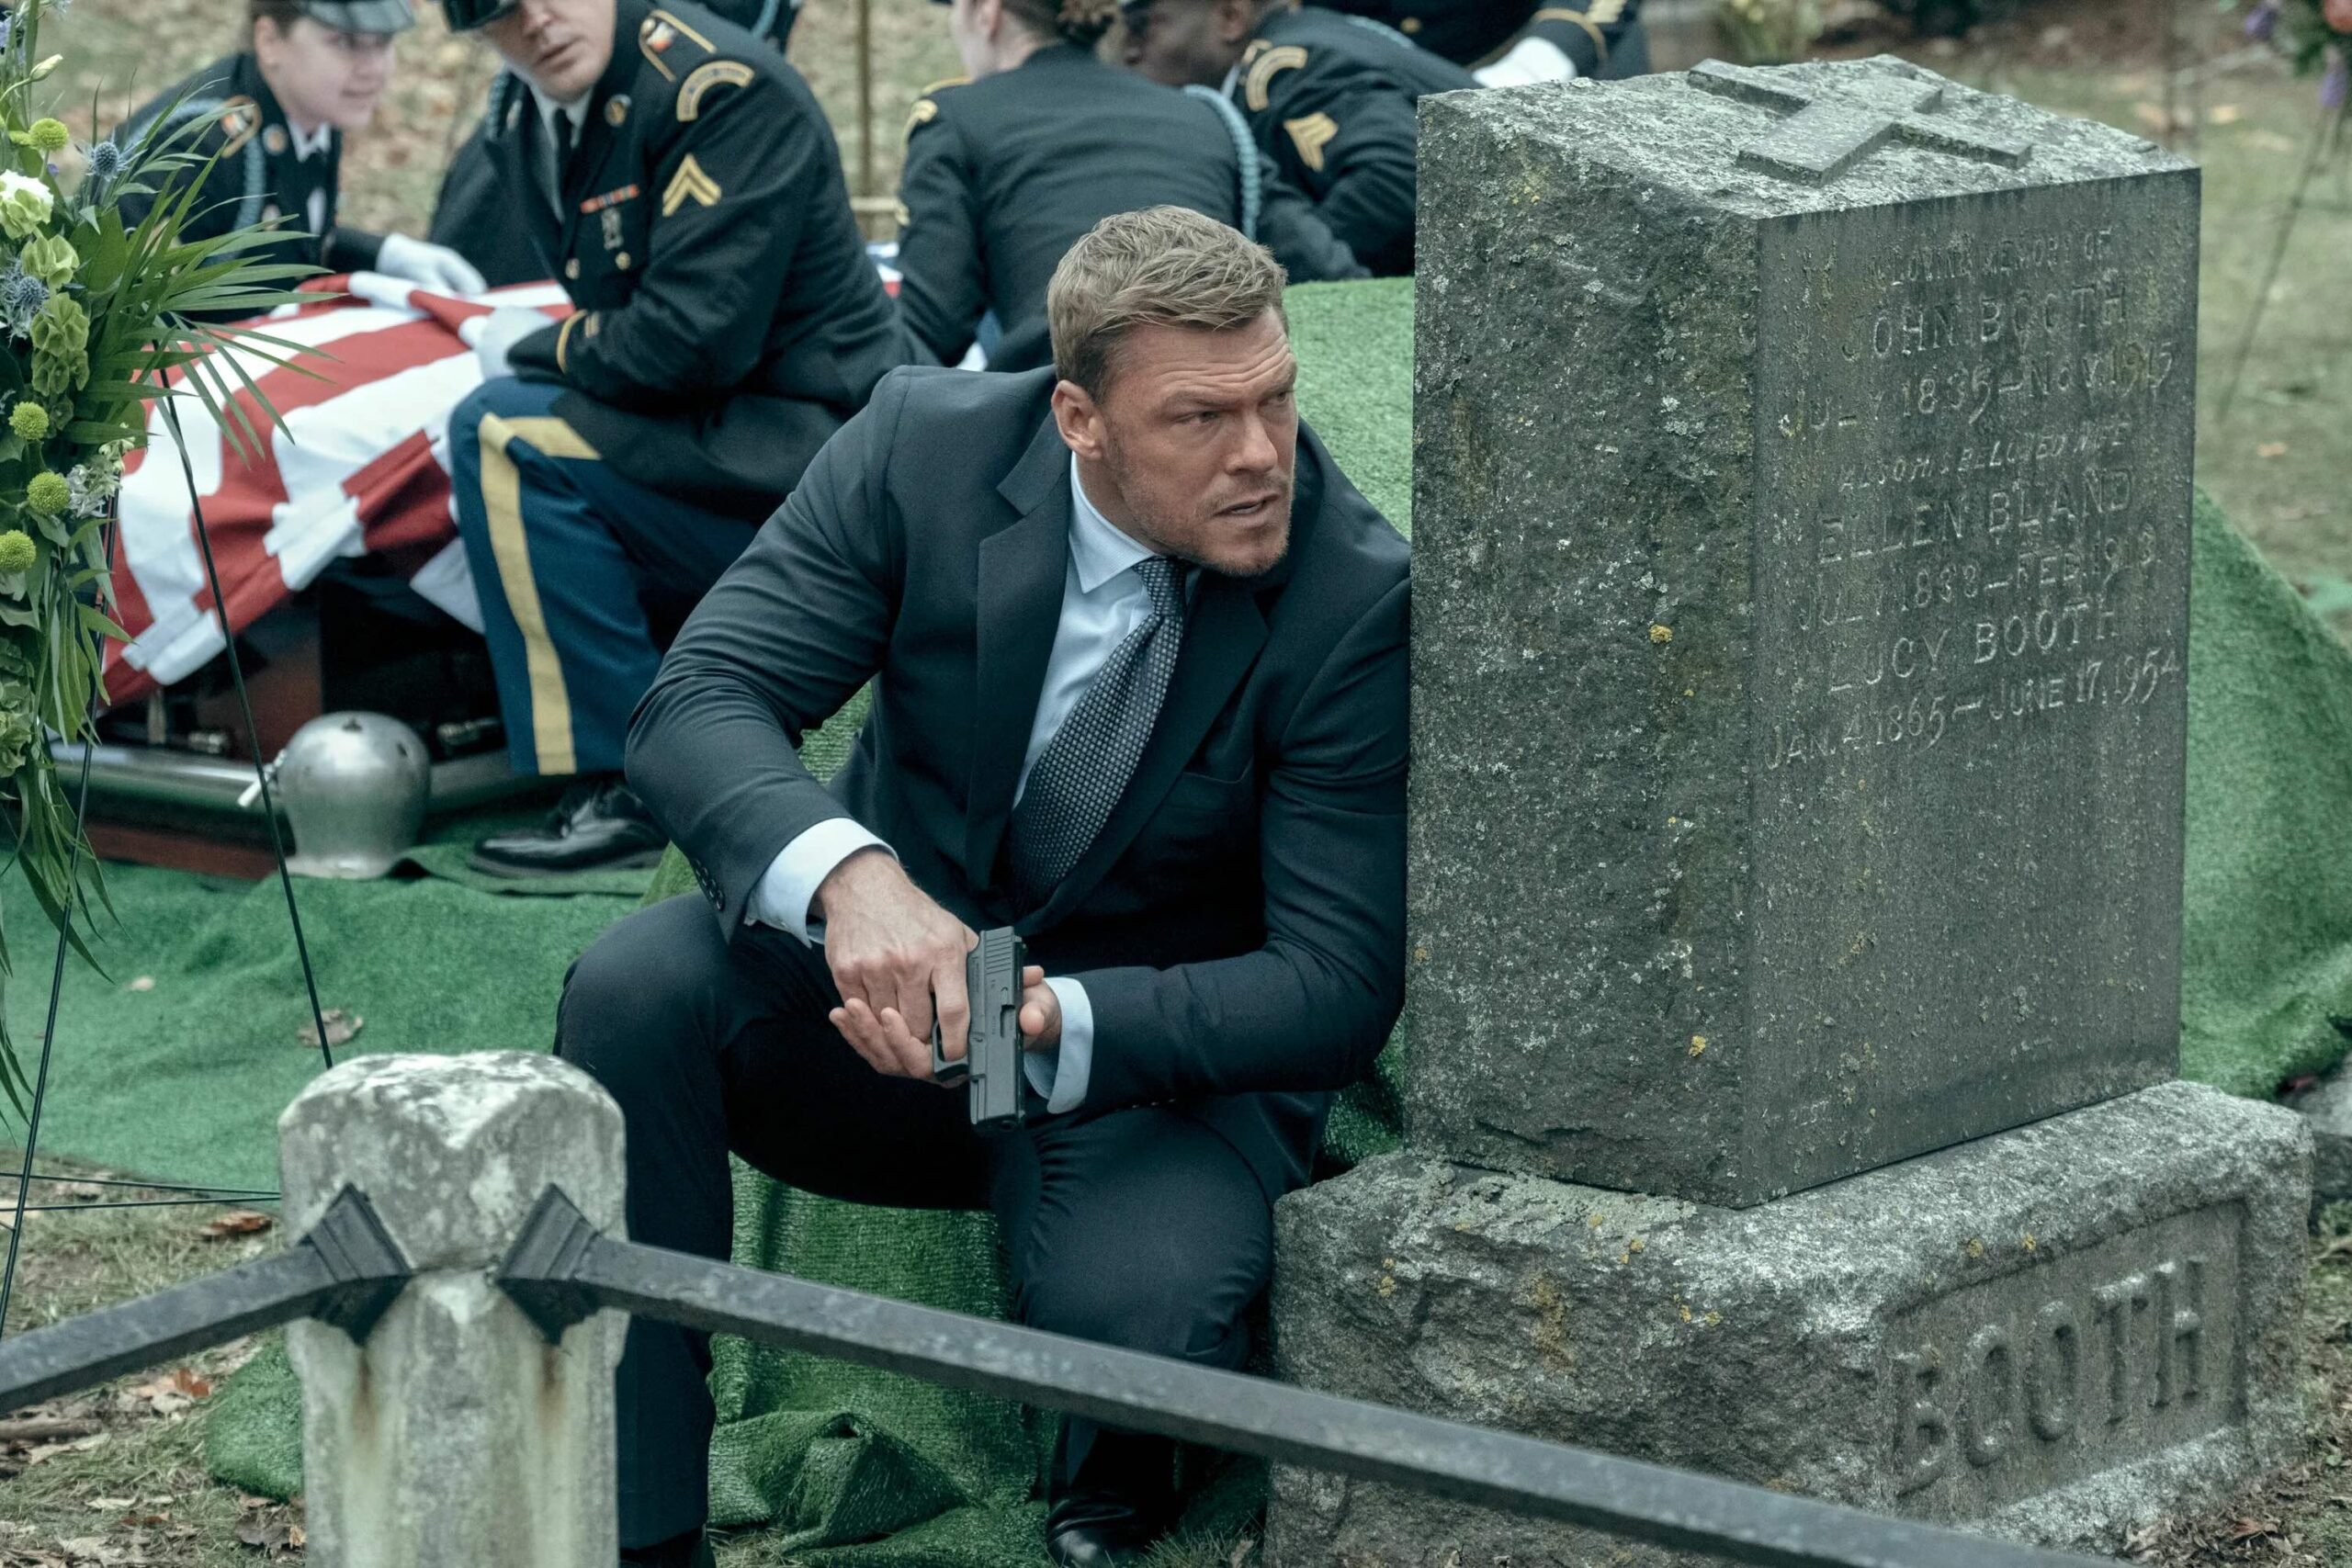 One scene from the second season of Reacher in which snipers attack a funeral.